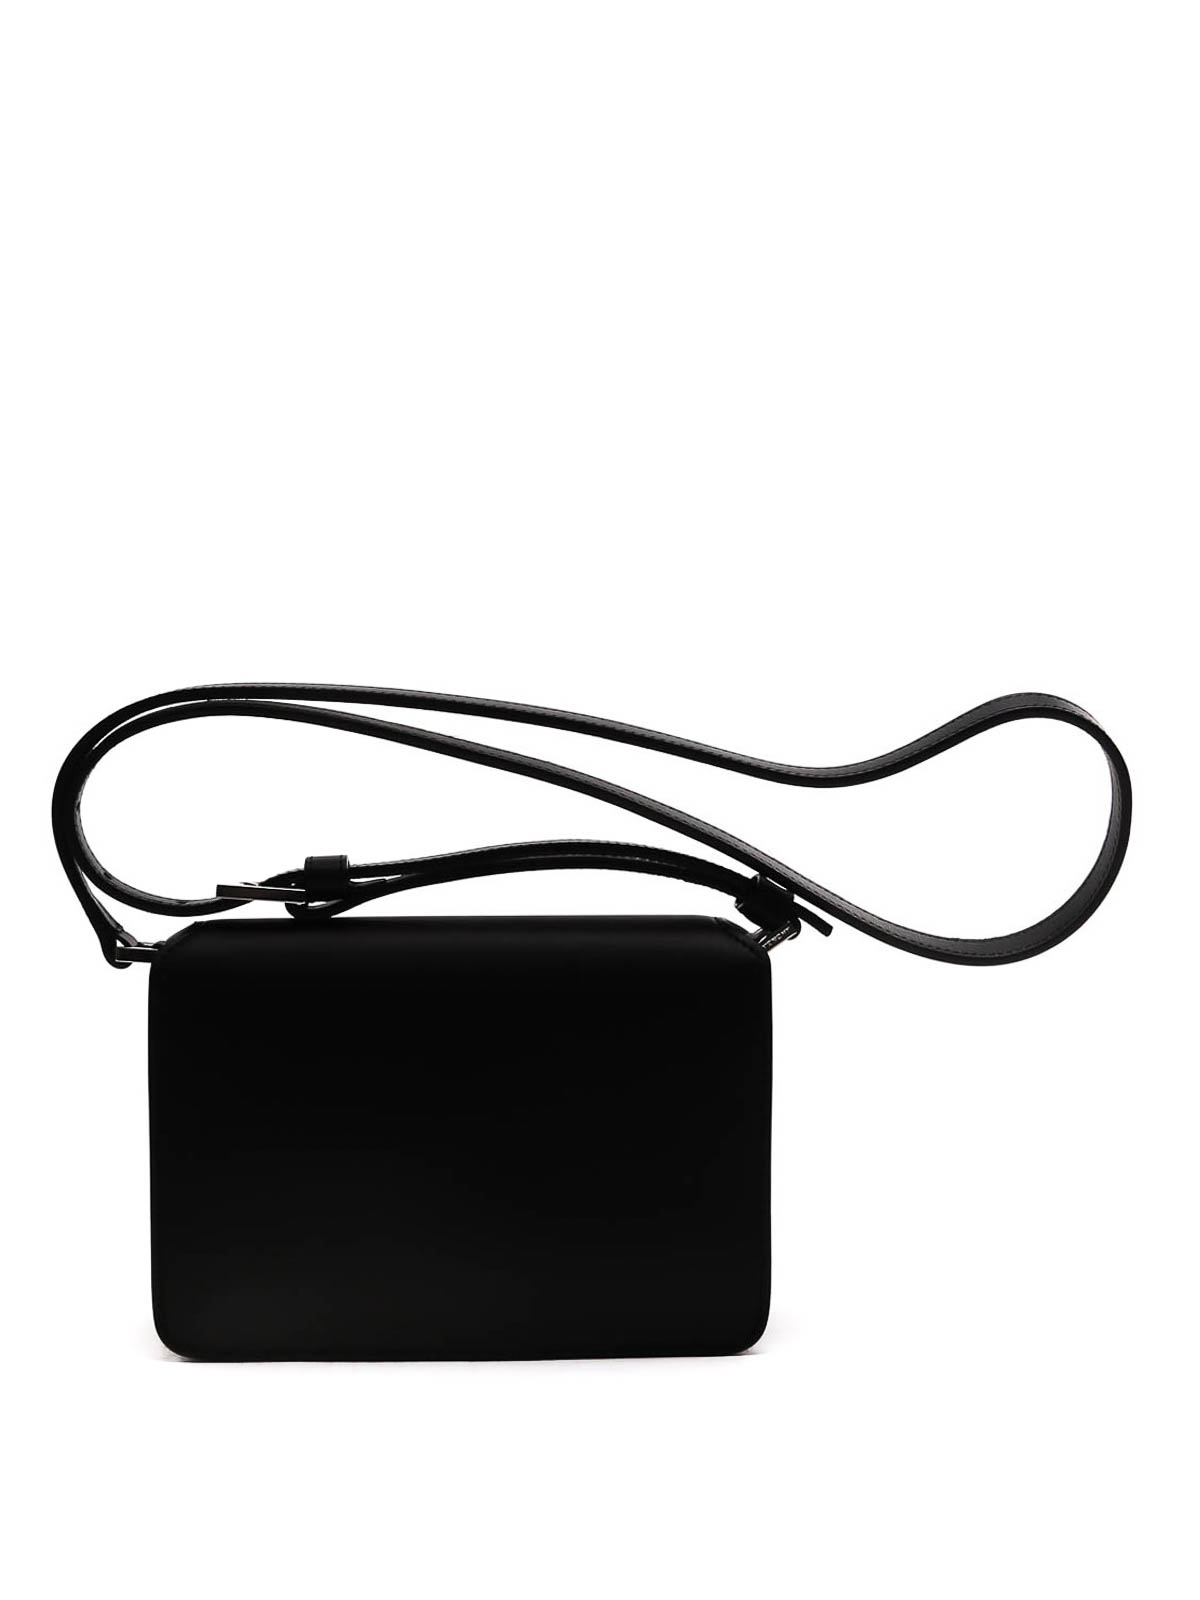 givenchy black logo embossed small leather bag